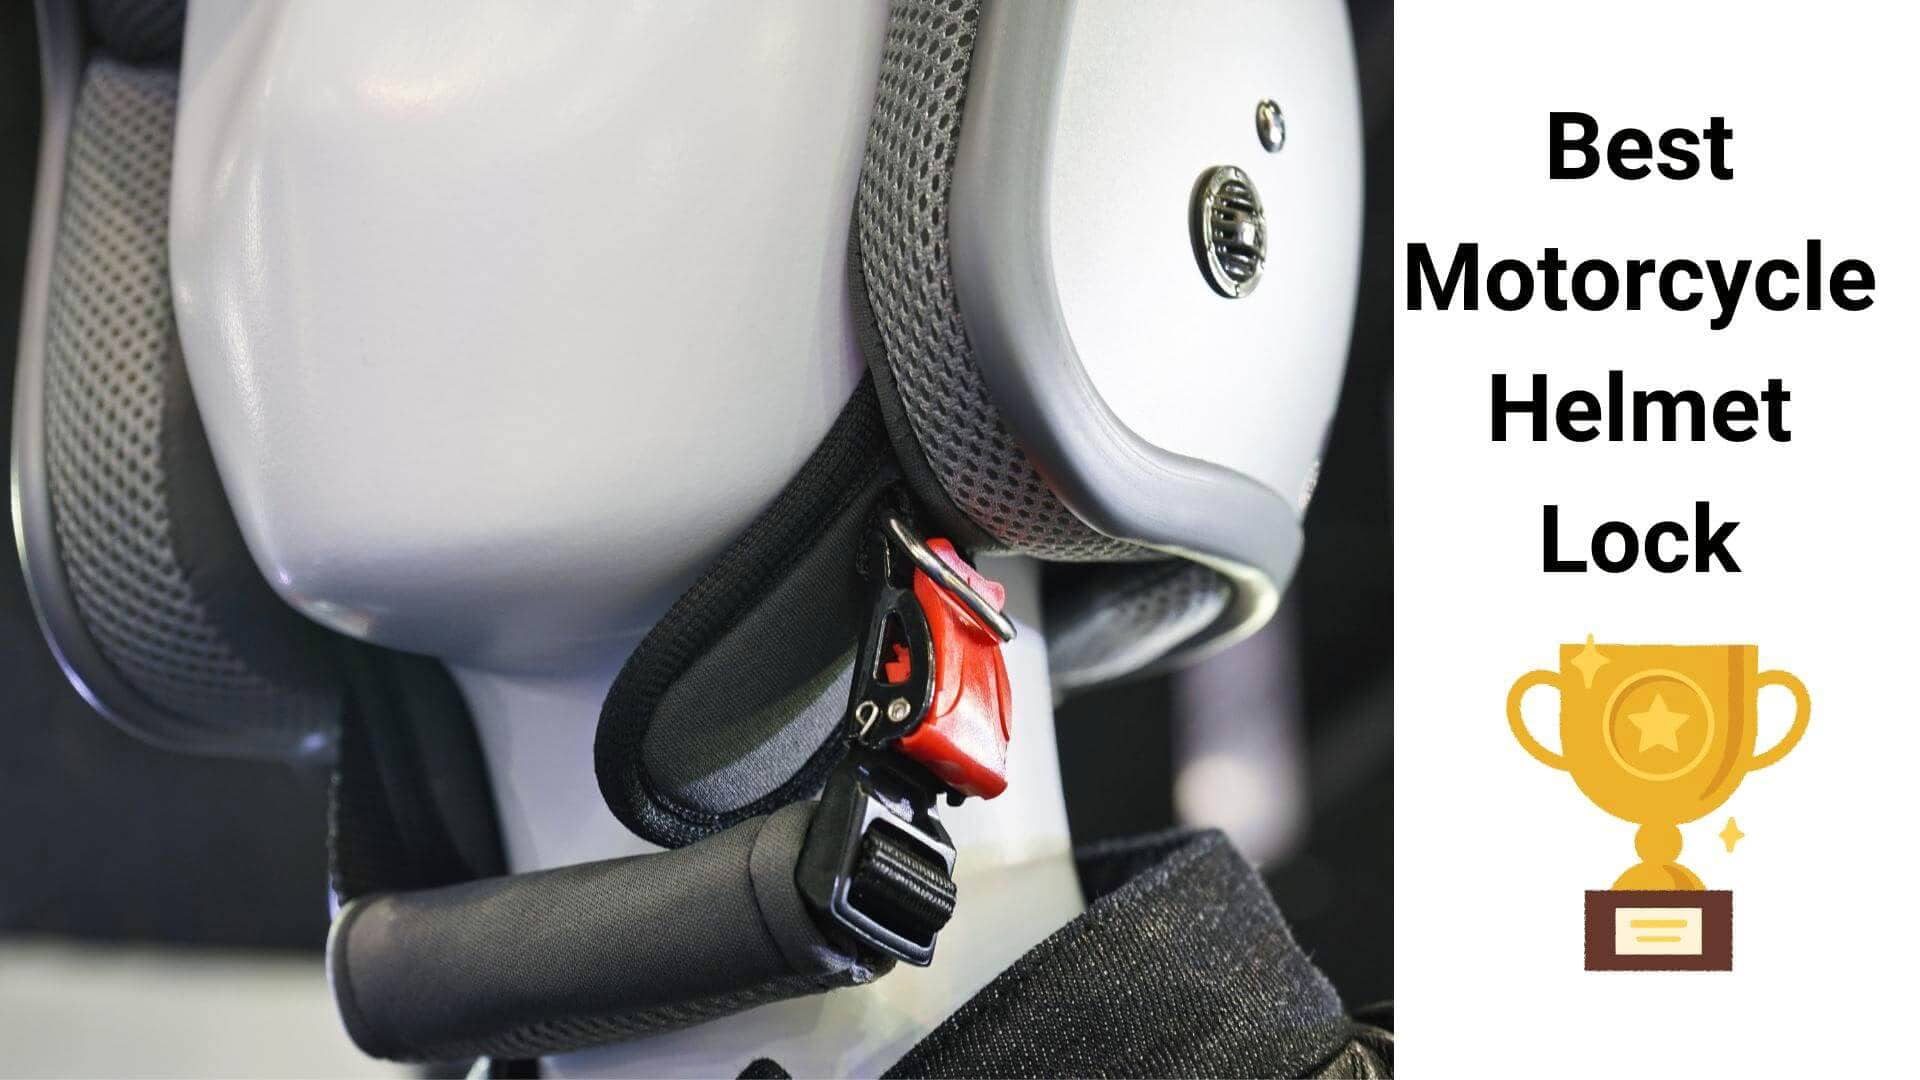 The Top 10 Best Motorcycle Helmet Lock To Keep Your Ride Safe